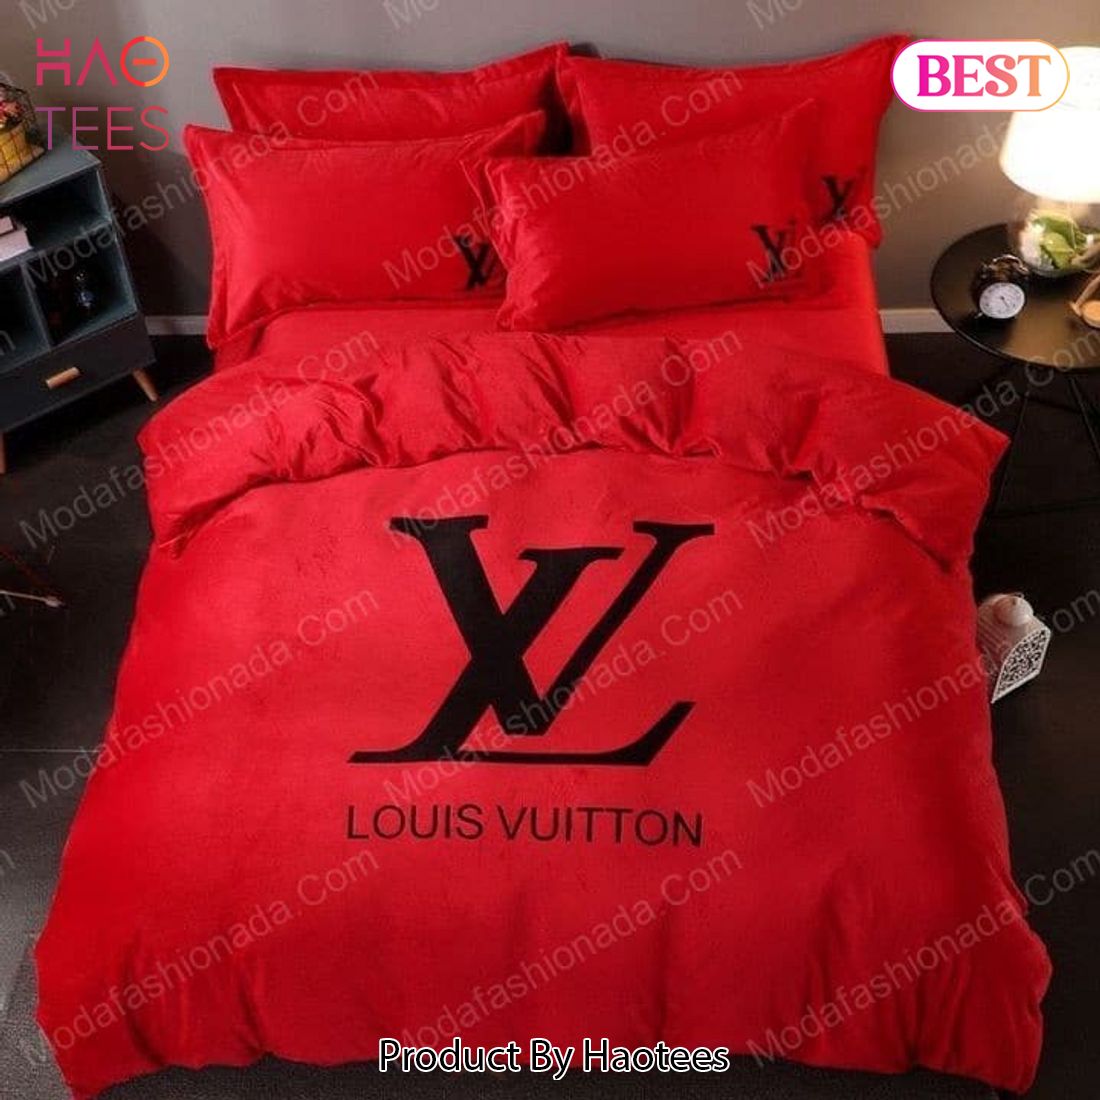 Buy Louis Vuitton Brands 5 Bedding Set Bed sets with Twin, Full